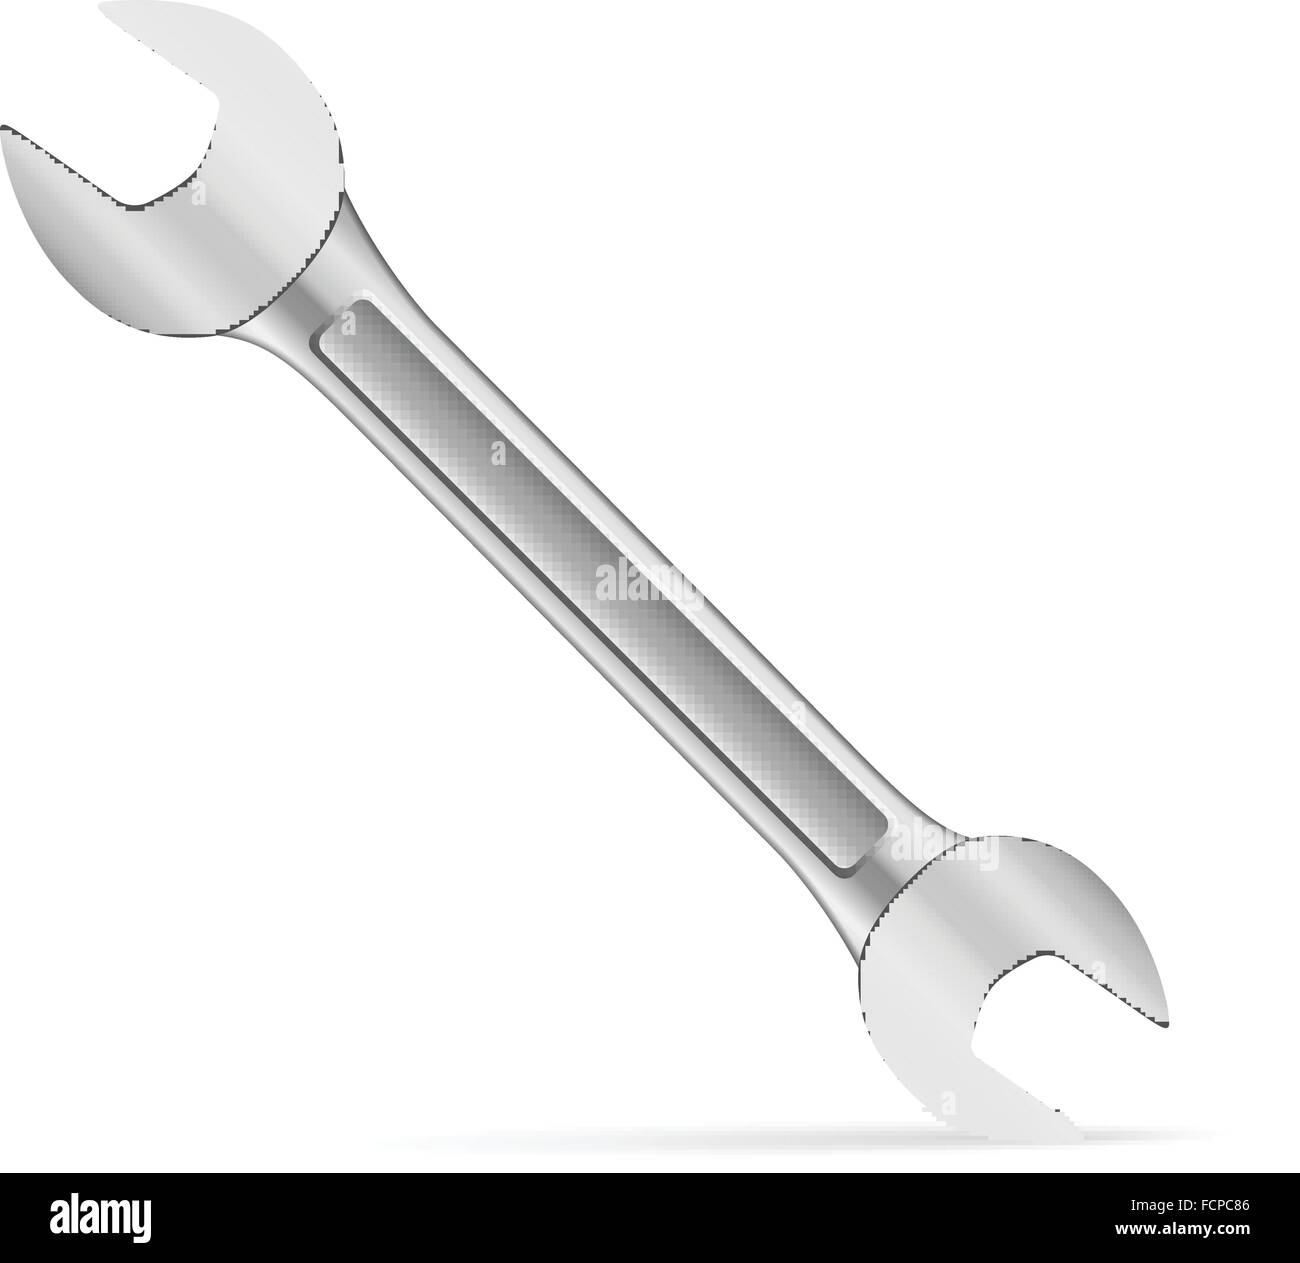 Wrench on a white background. Stock Vector